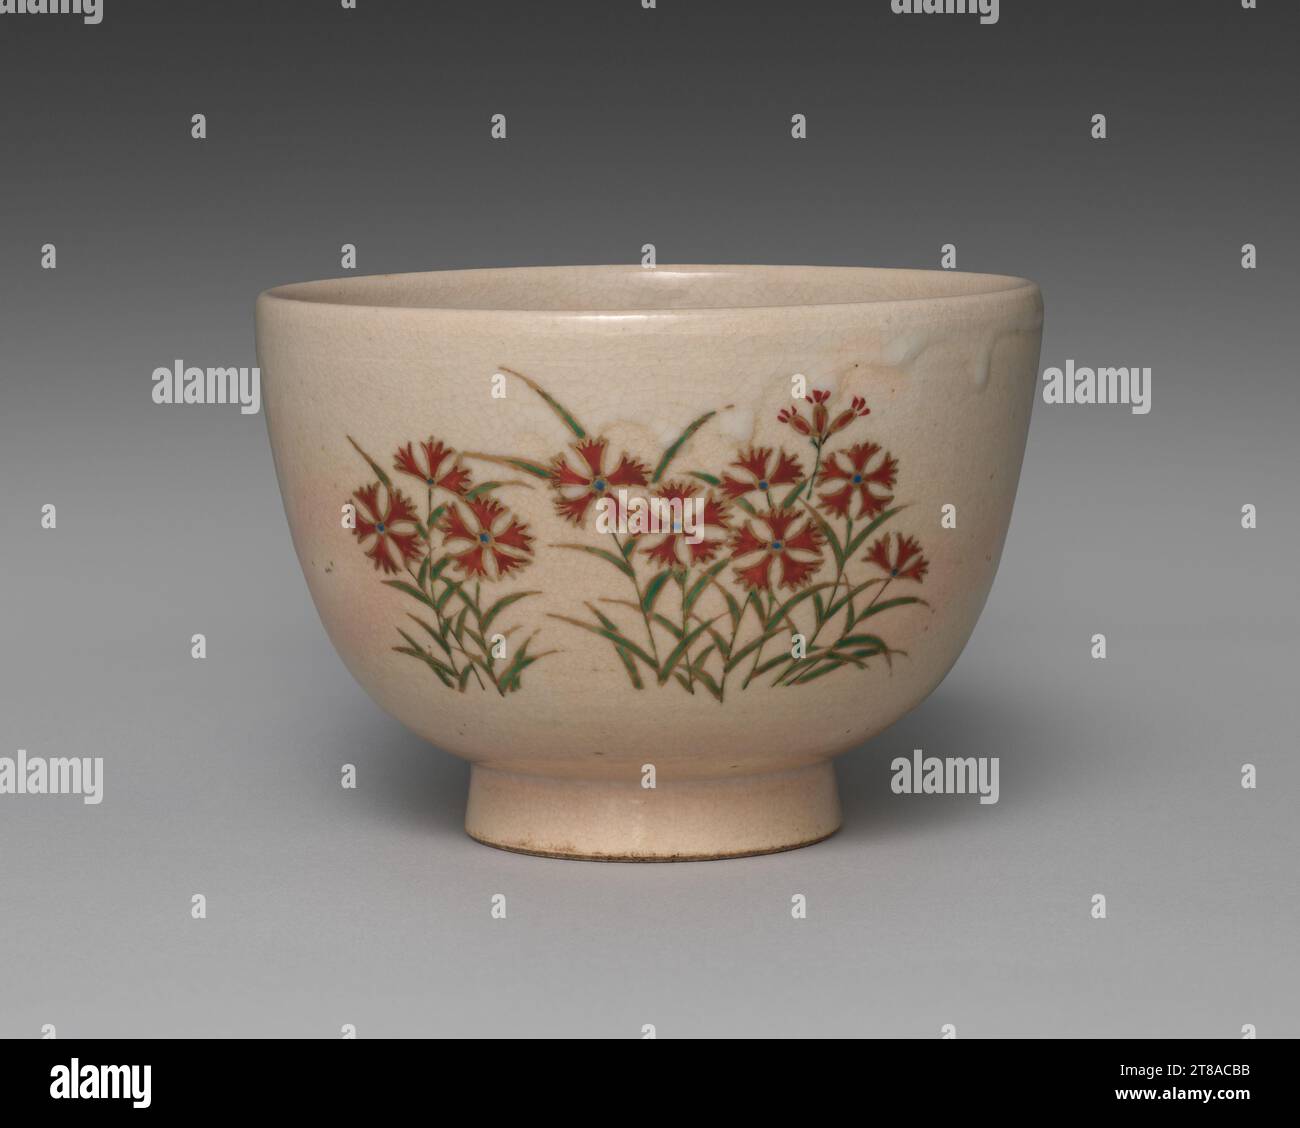 While porcelain was their primary specialization, all the members of the Seif? studio also made stoneware painted with iron oxide designs under the glaze and with color enamel and gold over the glaze. Many examples are further characterized by pink dots brought out during firing and by crackling in the glaze. Works of this type are classified as Kyoto ware, after the city where the style developed. People used the ceramics for a diversity of purposes, from everyday dining to chanoyu, or Japanese tea practice. Teabowl with Pinks, 1893–1914. Seifū Yohei III (Japanese, 1851–1914). Stoneware with Stock Photo